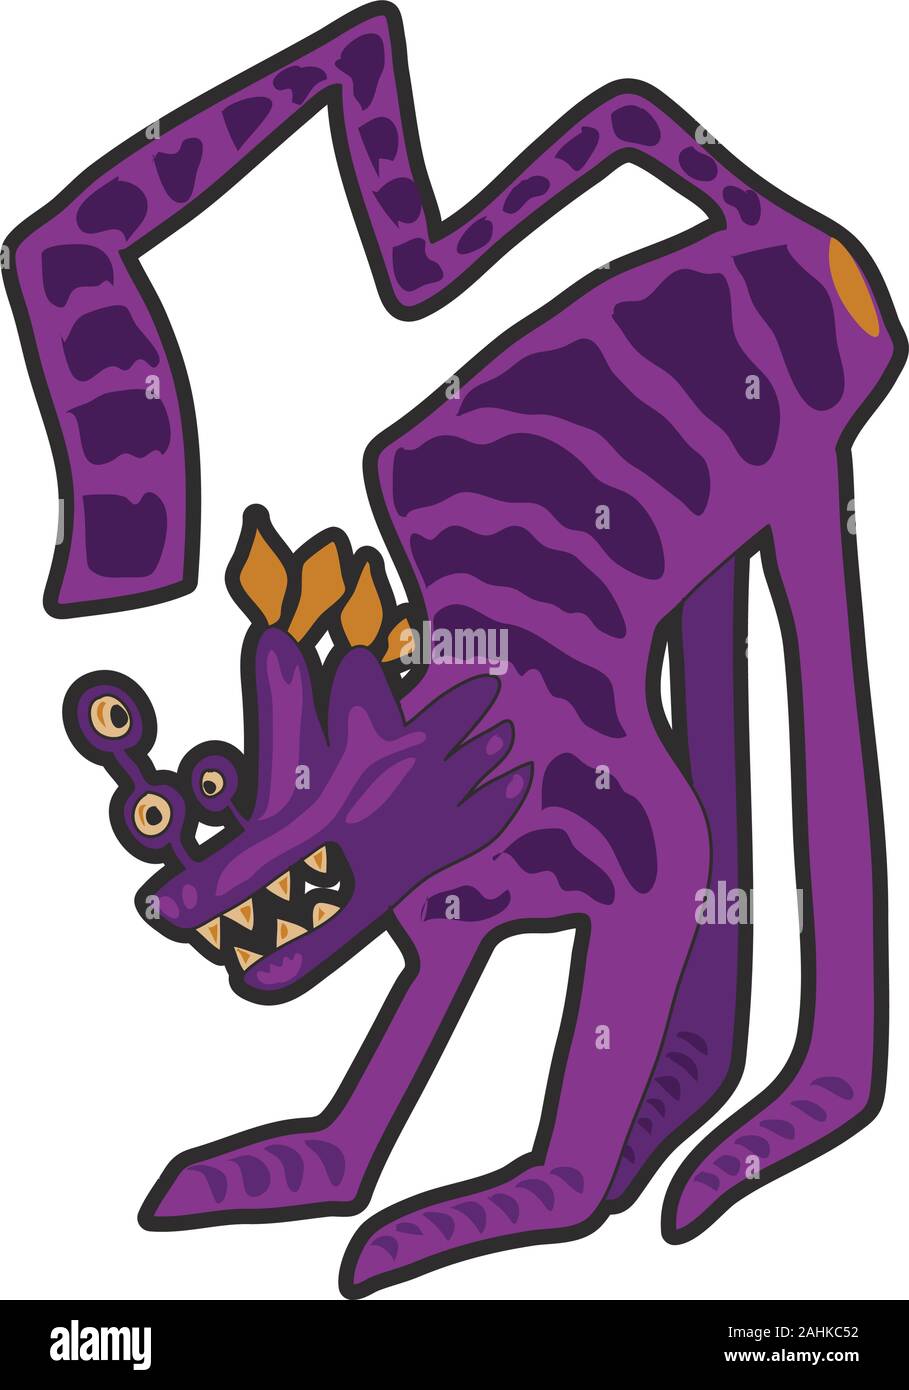 Angry cartoon violet monster. Cute illustration for prints on baby clothes. Stock Vector